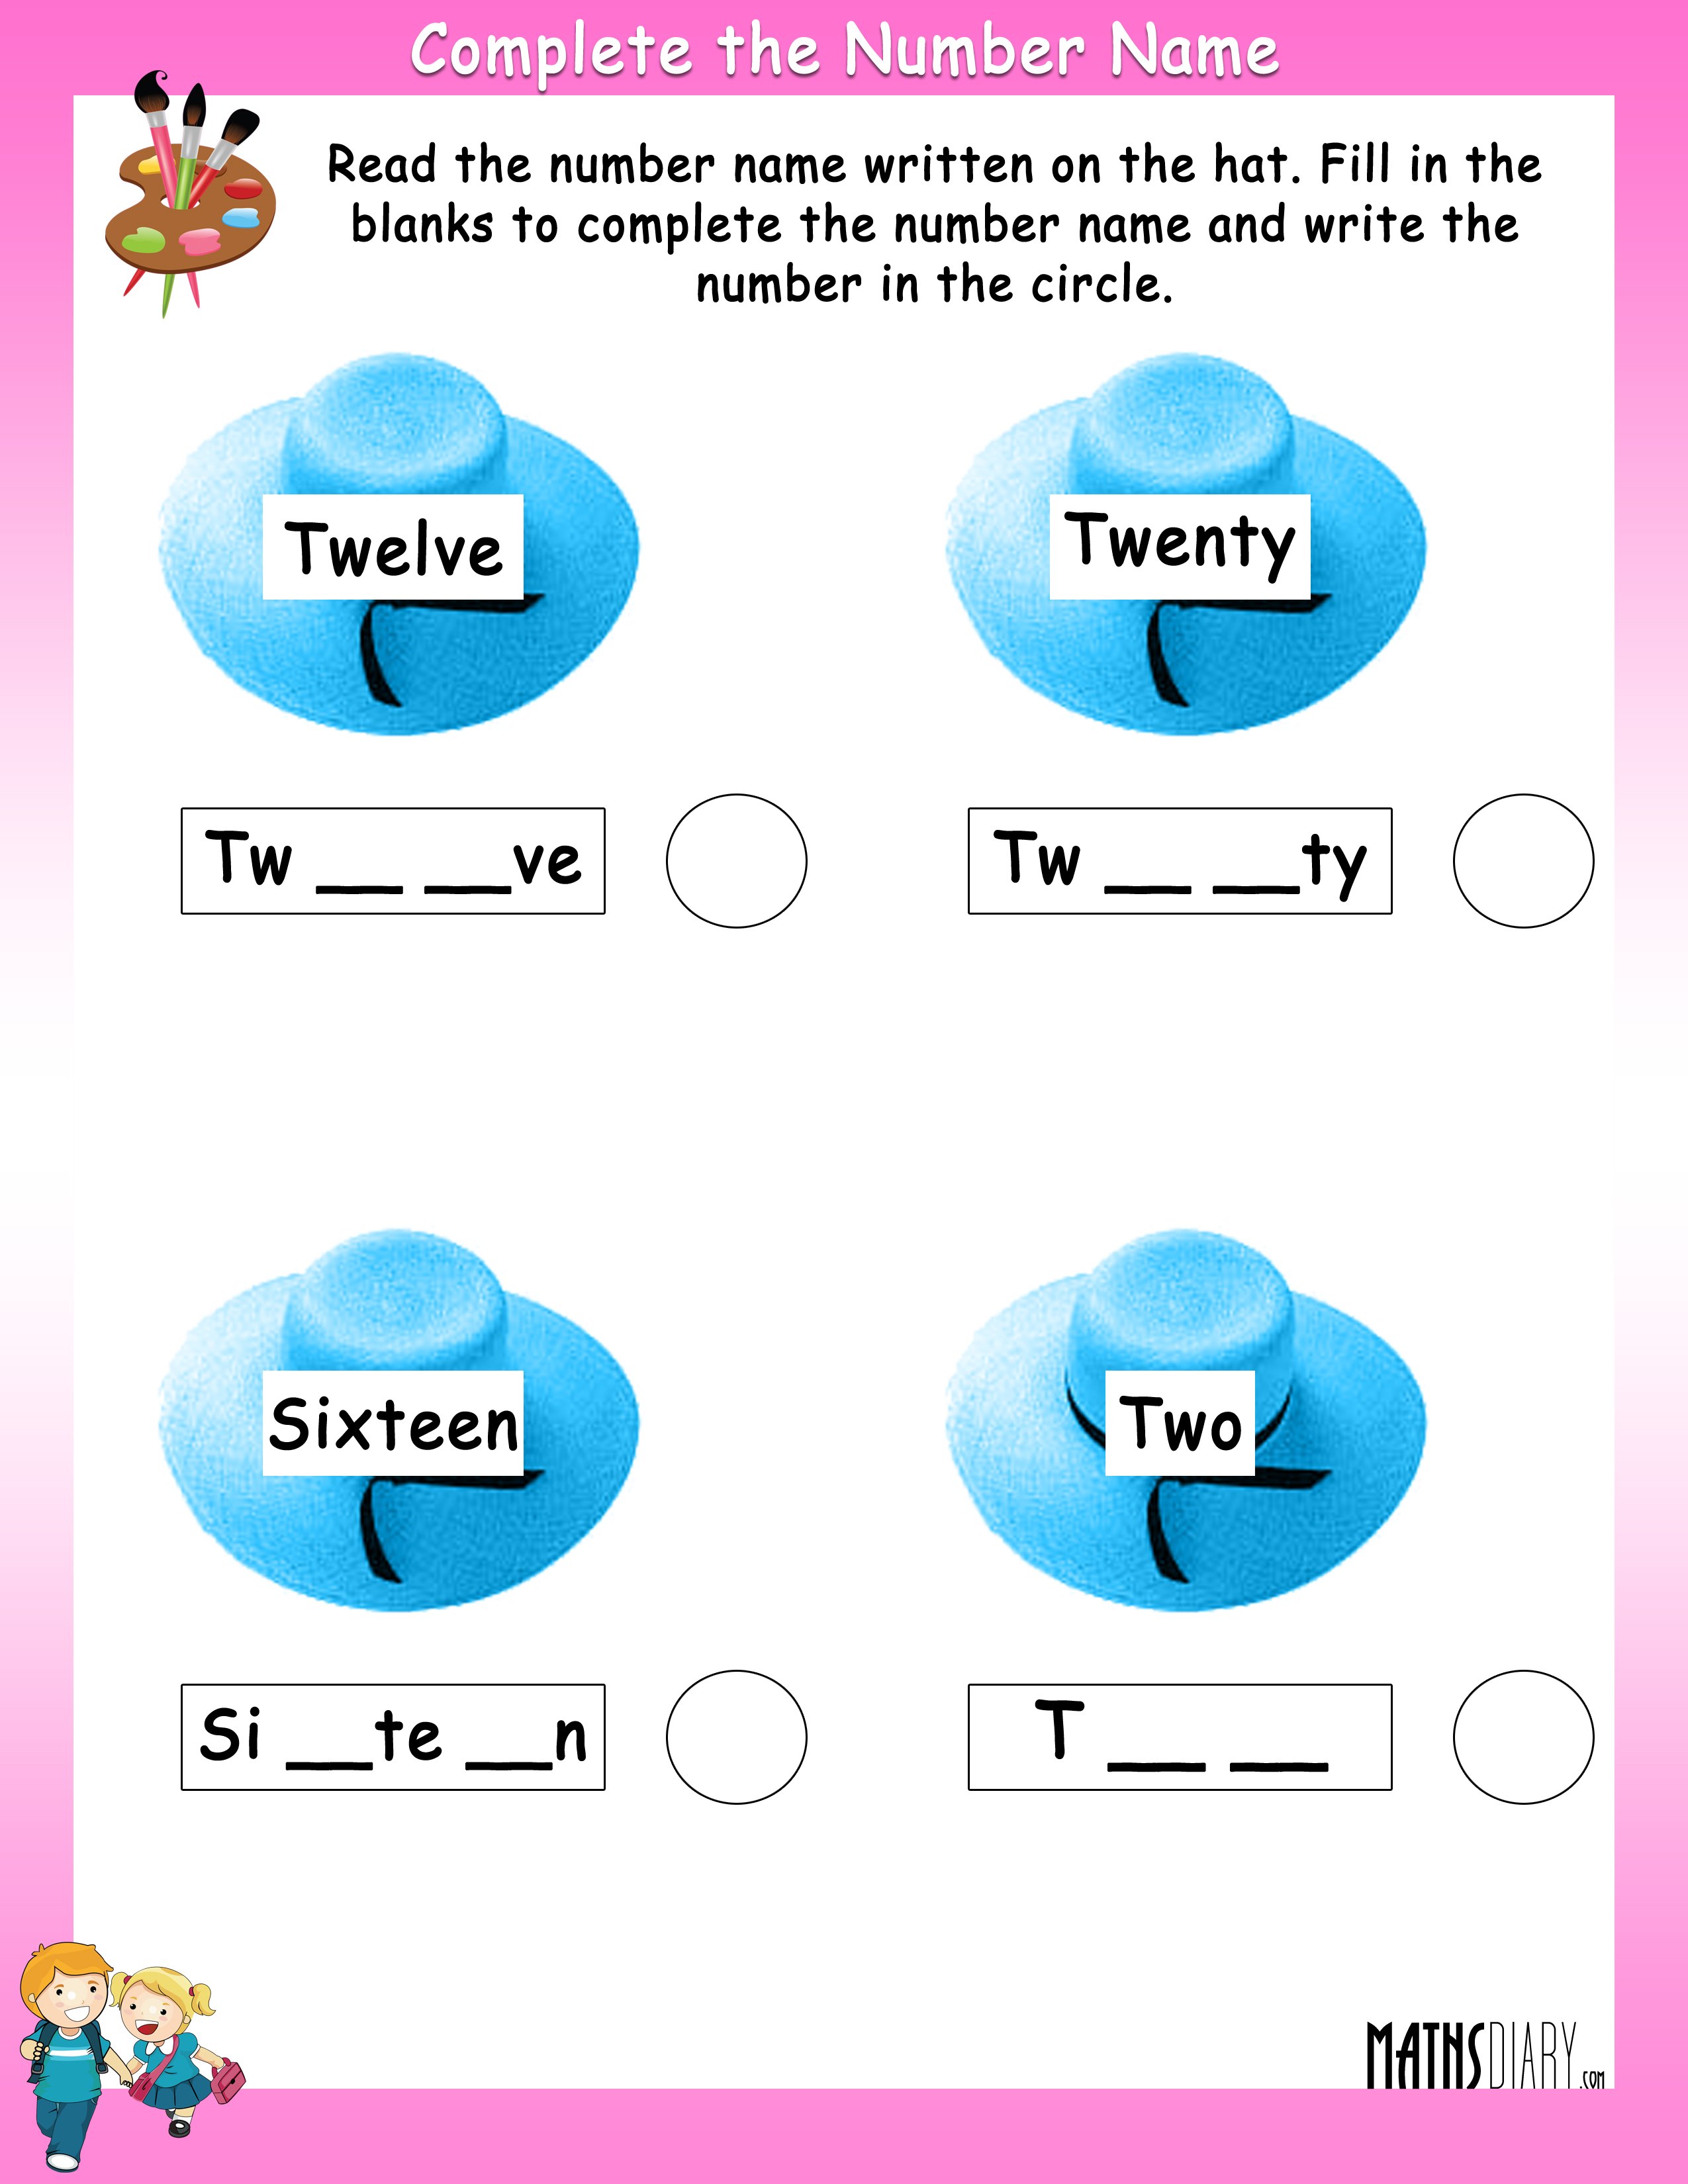 complete-the-number-names-math-worksheets-mathsdiary